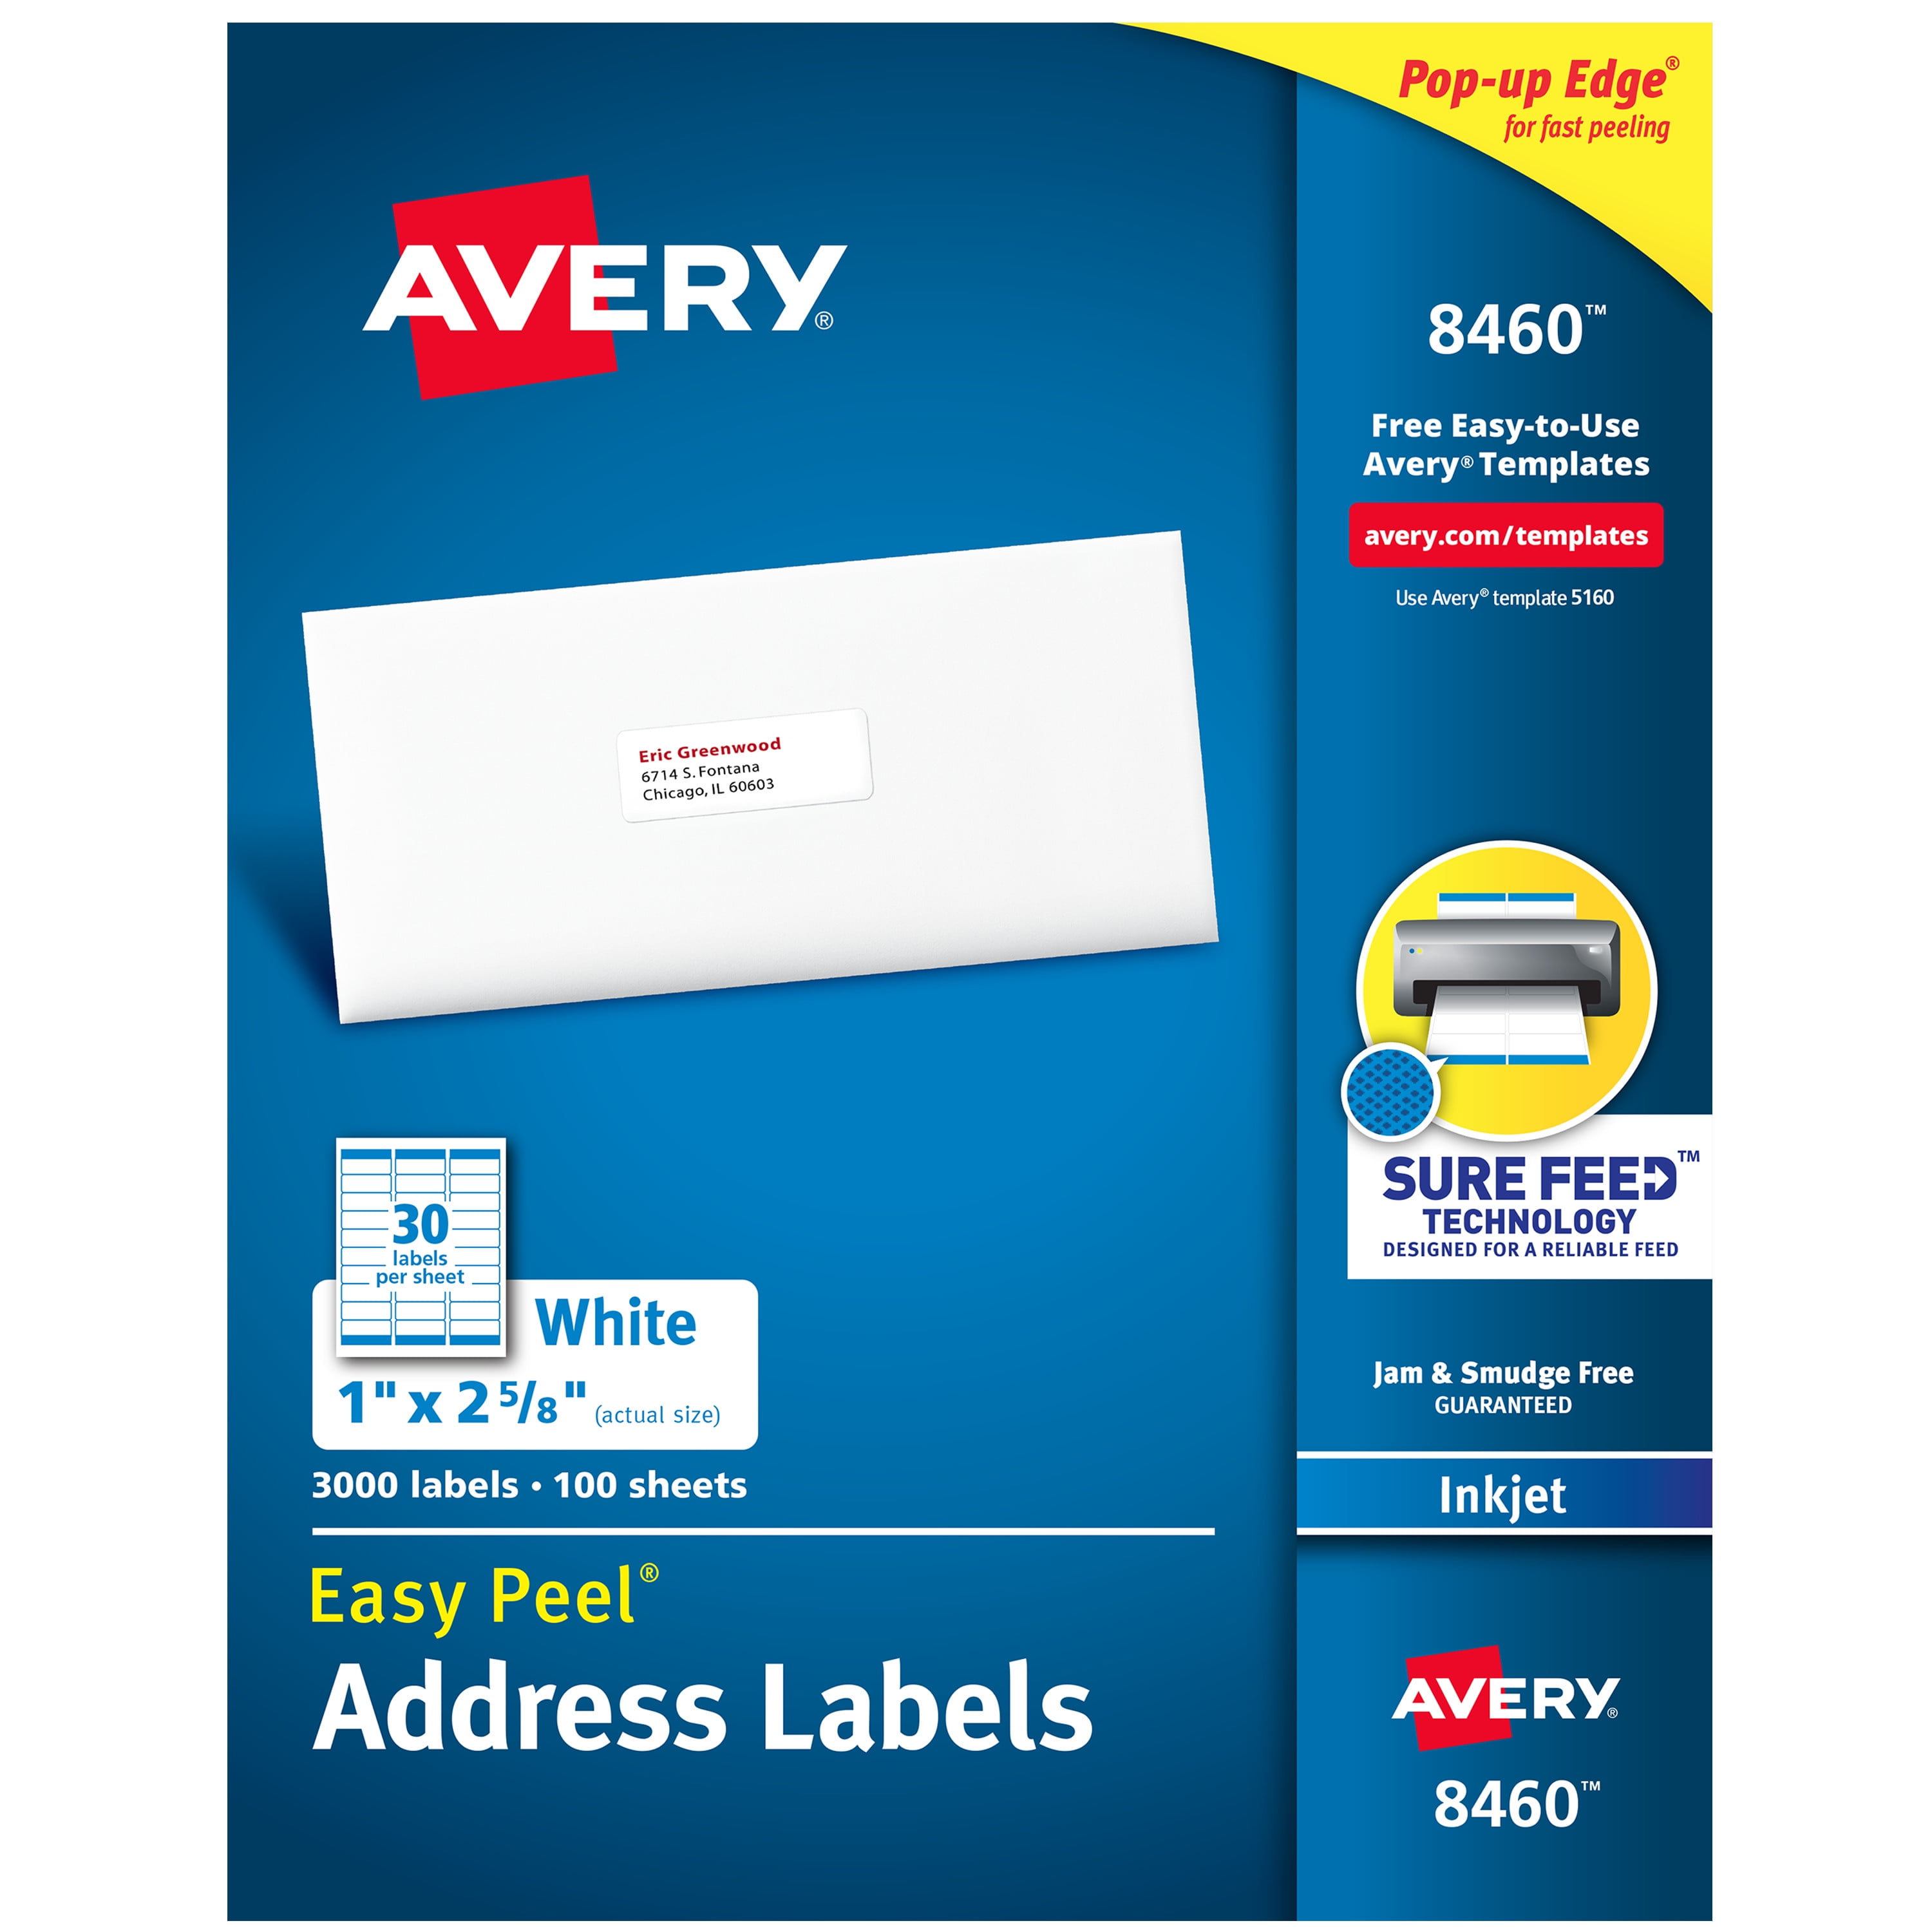 NEW Avery Labels #05418--1/2" X 3/4"--1,000/Package